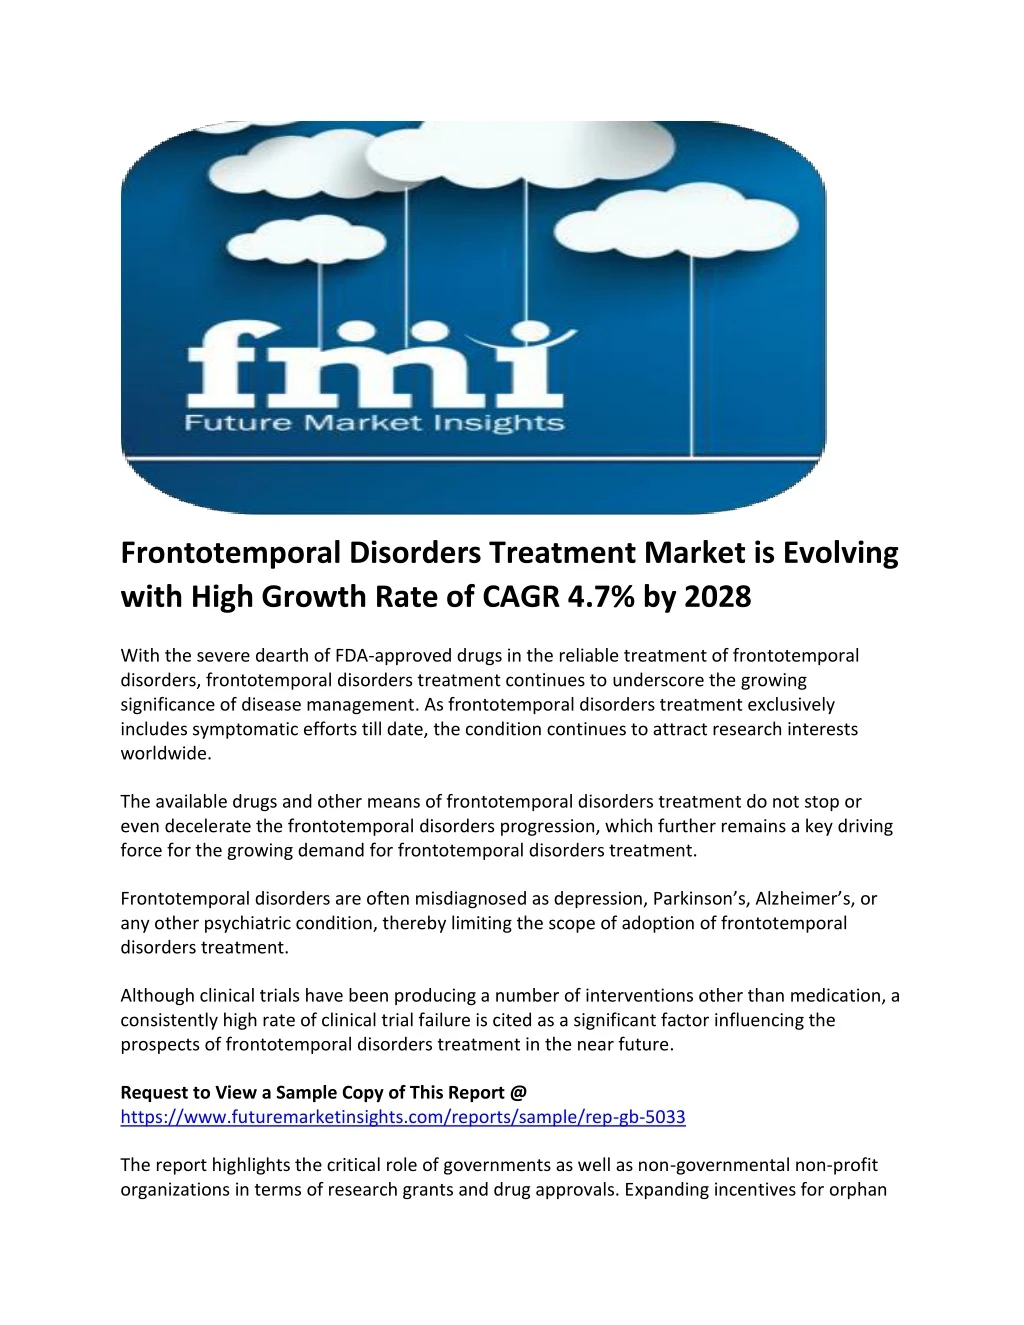 frontotemporal disorders treatment market